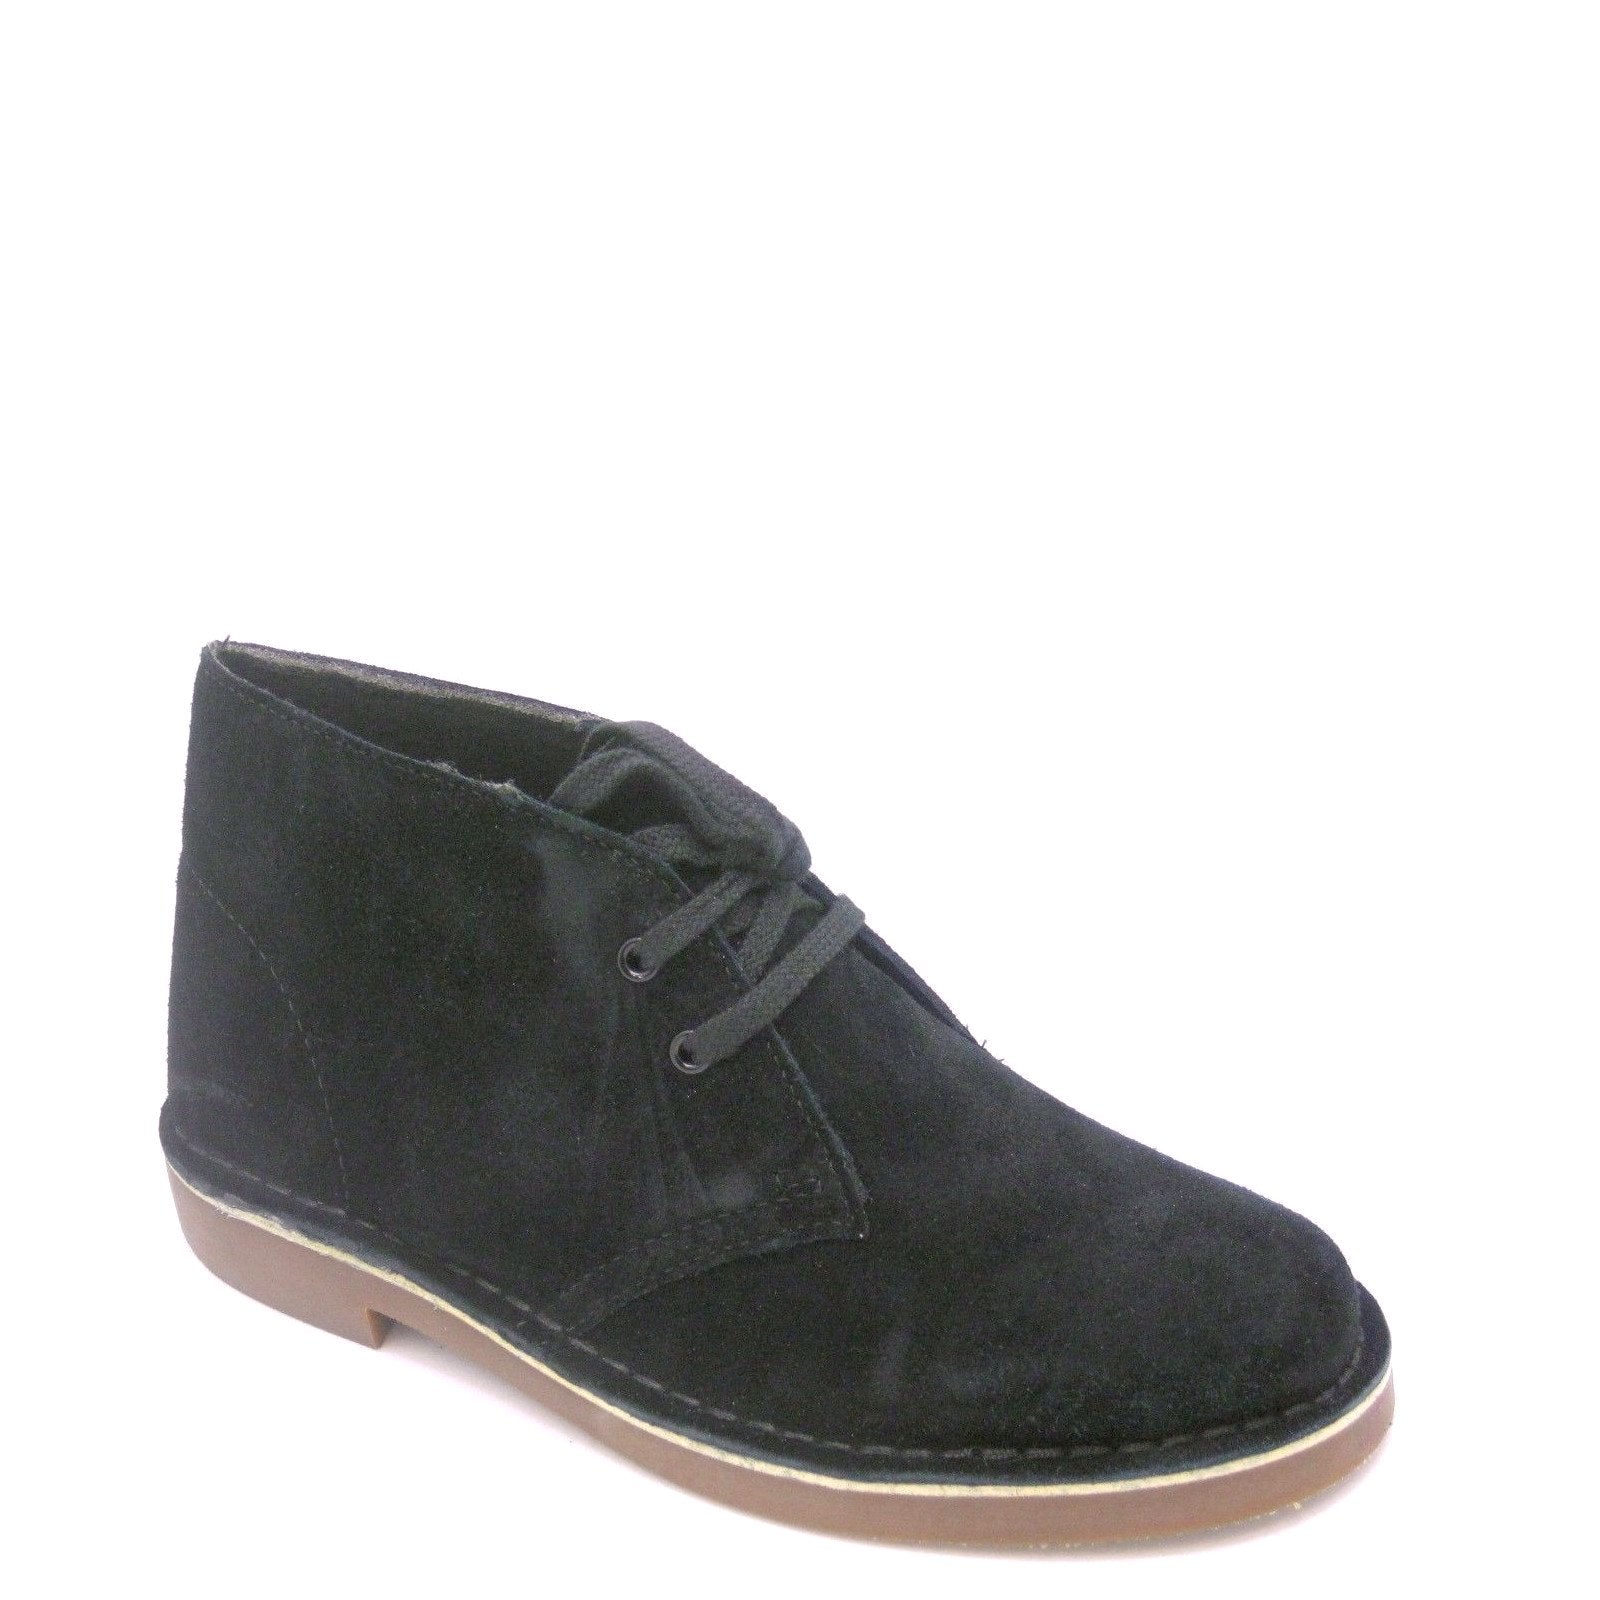 clarks women's suede ankle boots